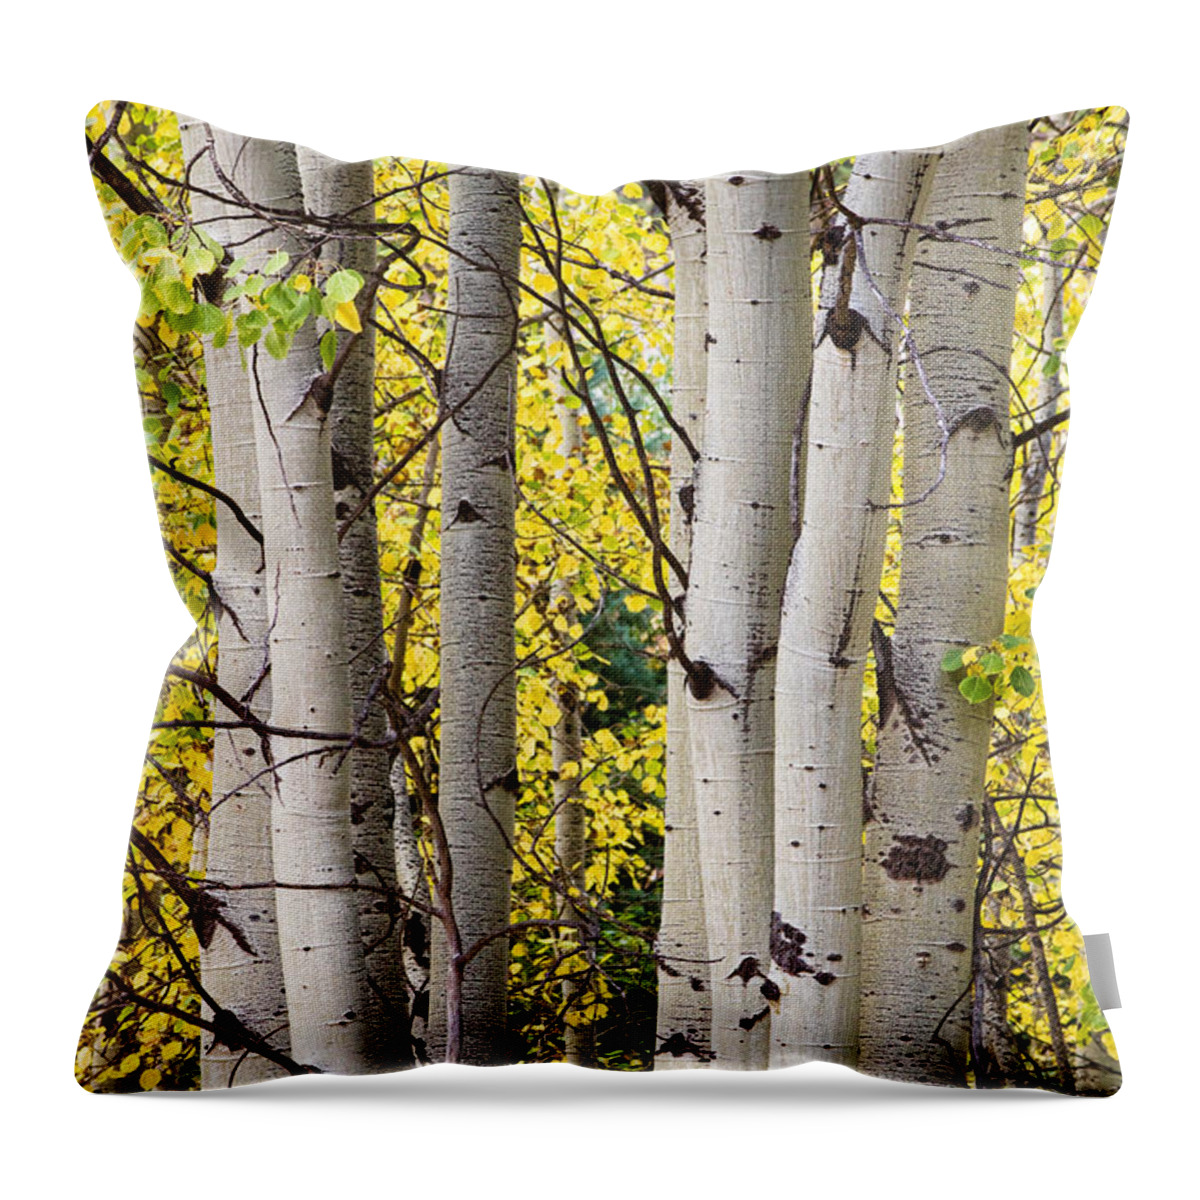 Aspen Throw Pillow featuring the photograph Aspen Trees in Autumn Color Portrait View by James BO Insogna